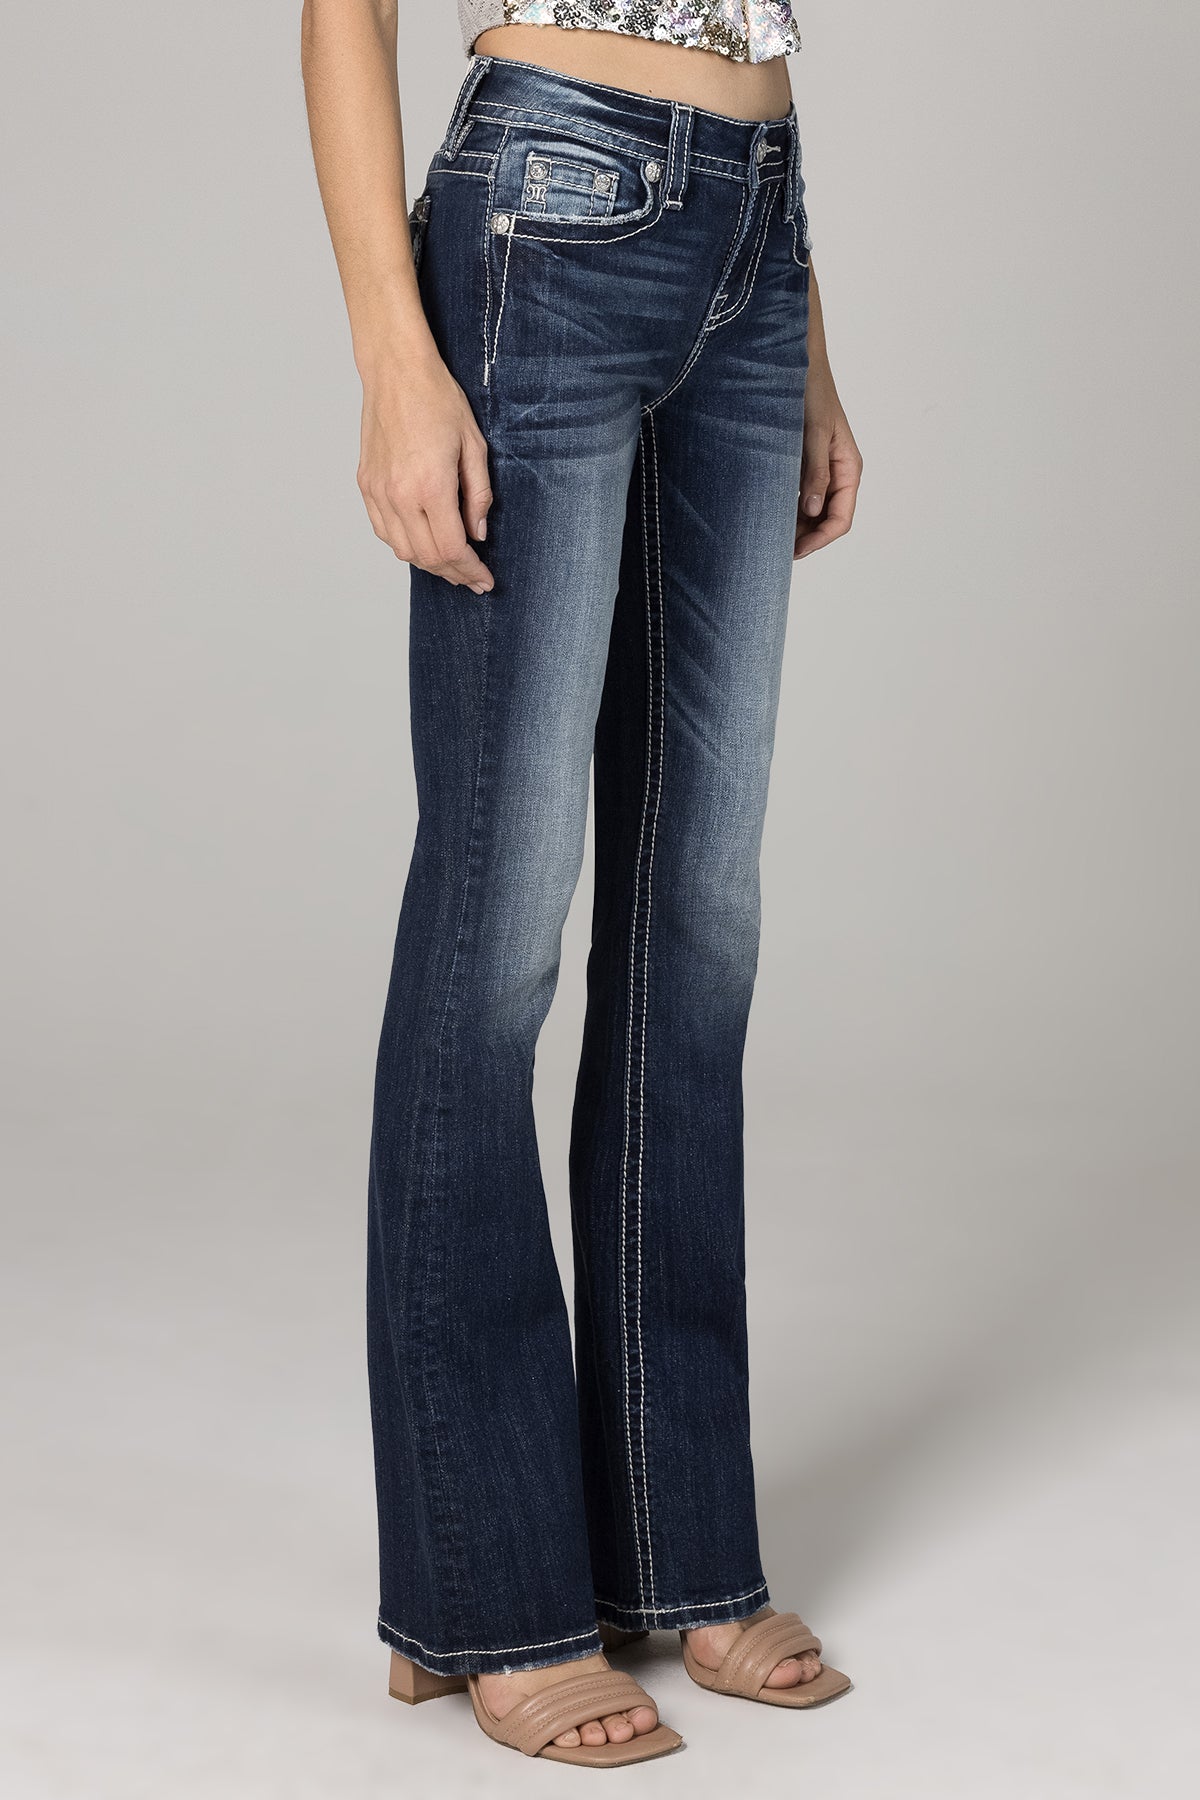 Double Horseshoe Bootcut Jean, Only $114.00